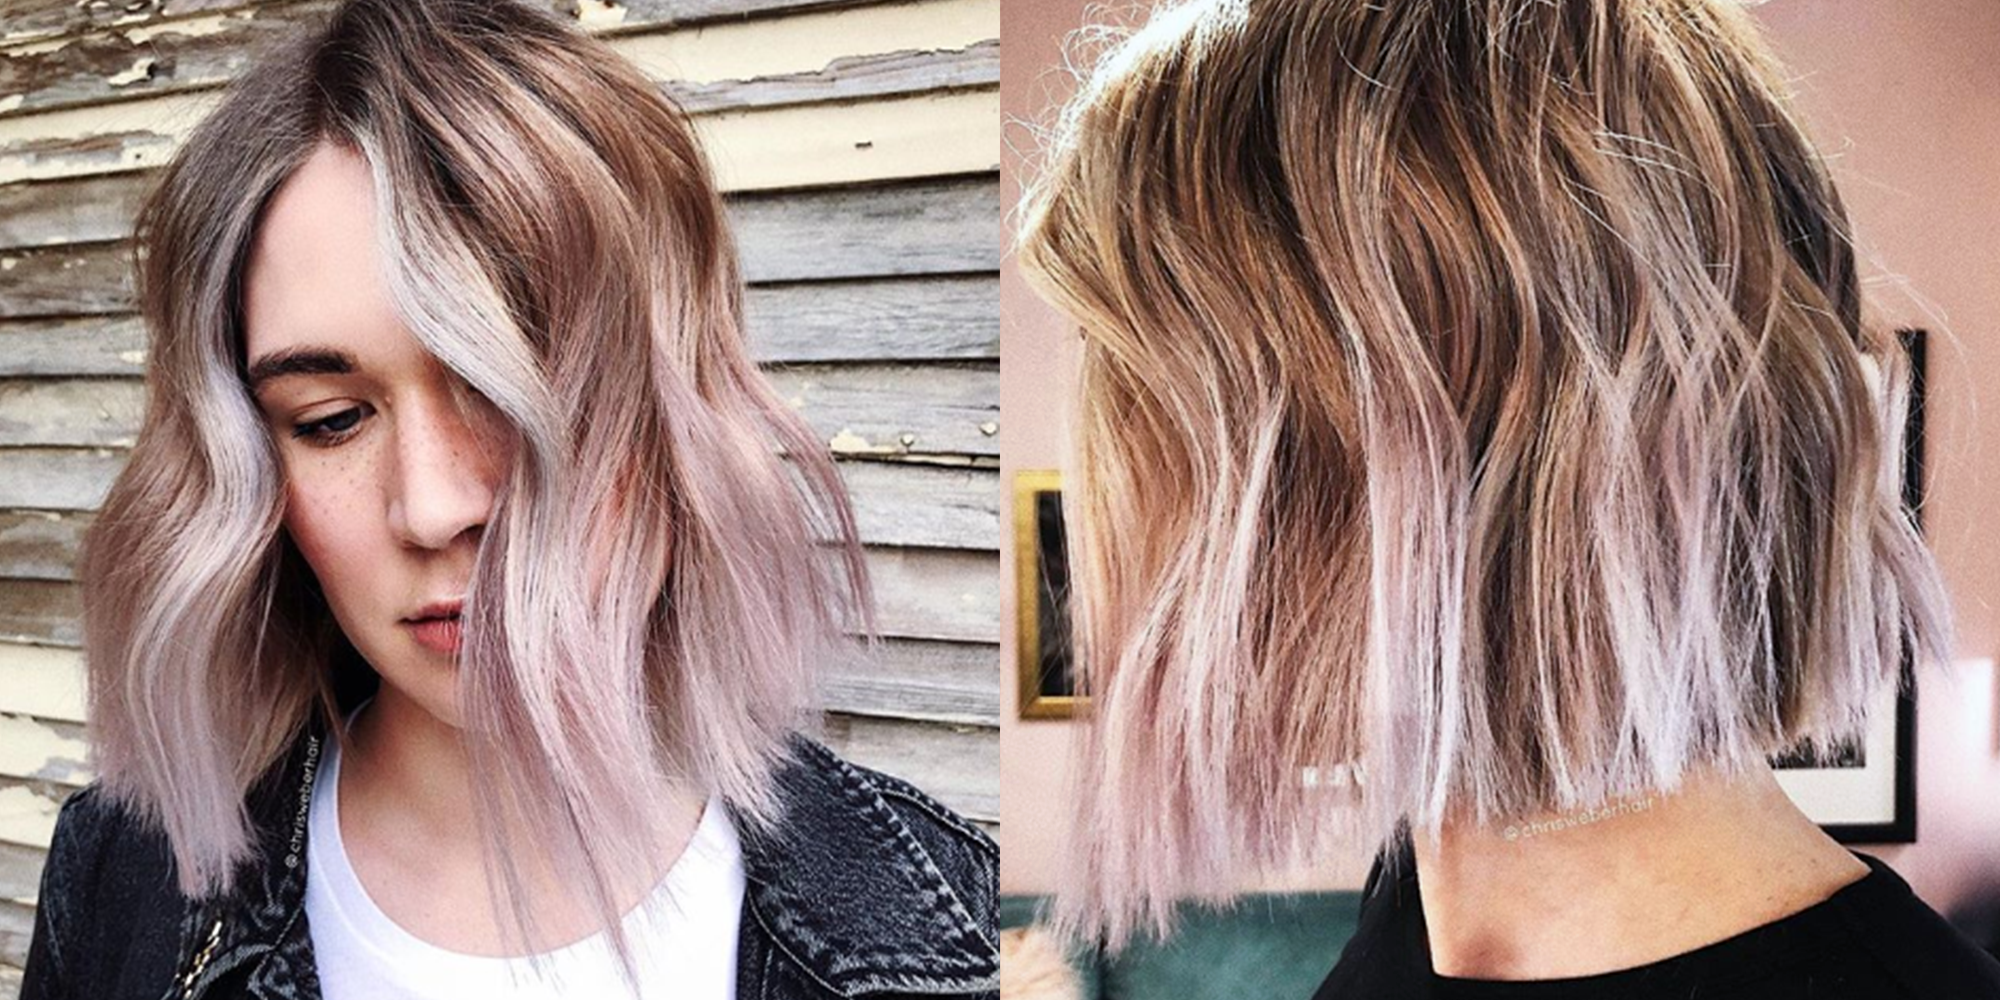 9. "Pinterest: The Ultimate Source for Vanilla Blonde Hair Inspiration" - wide 3